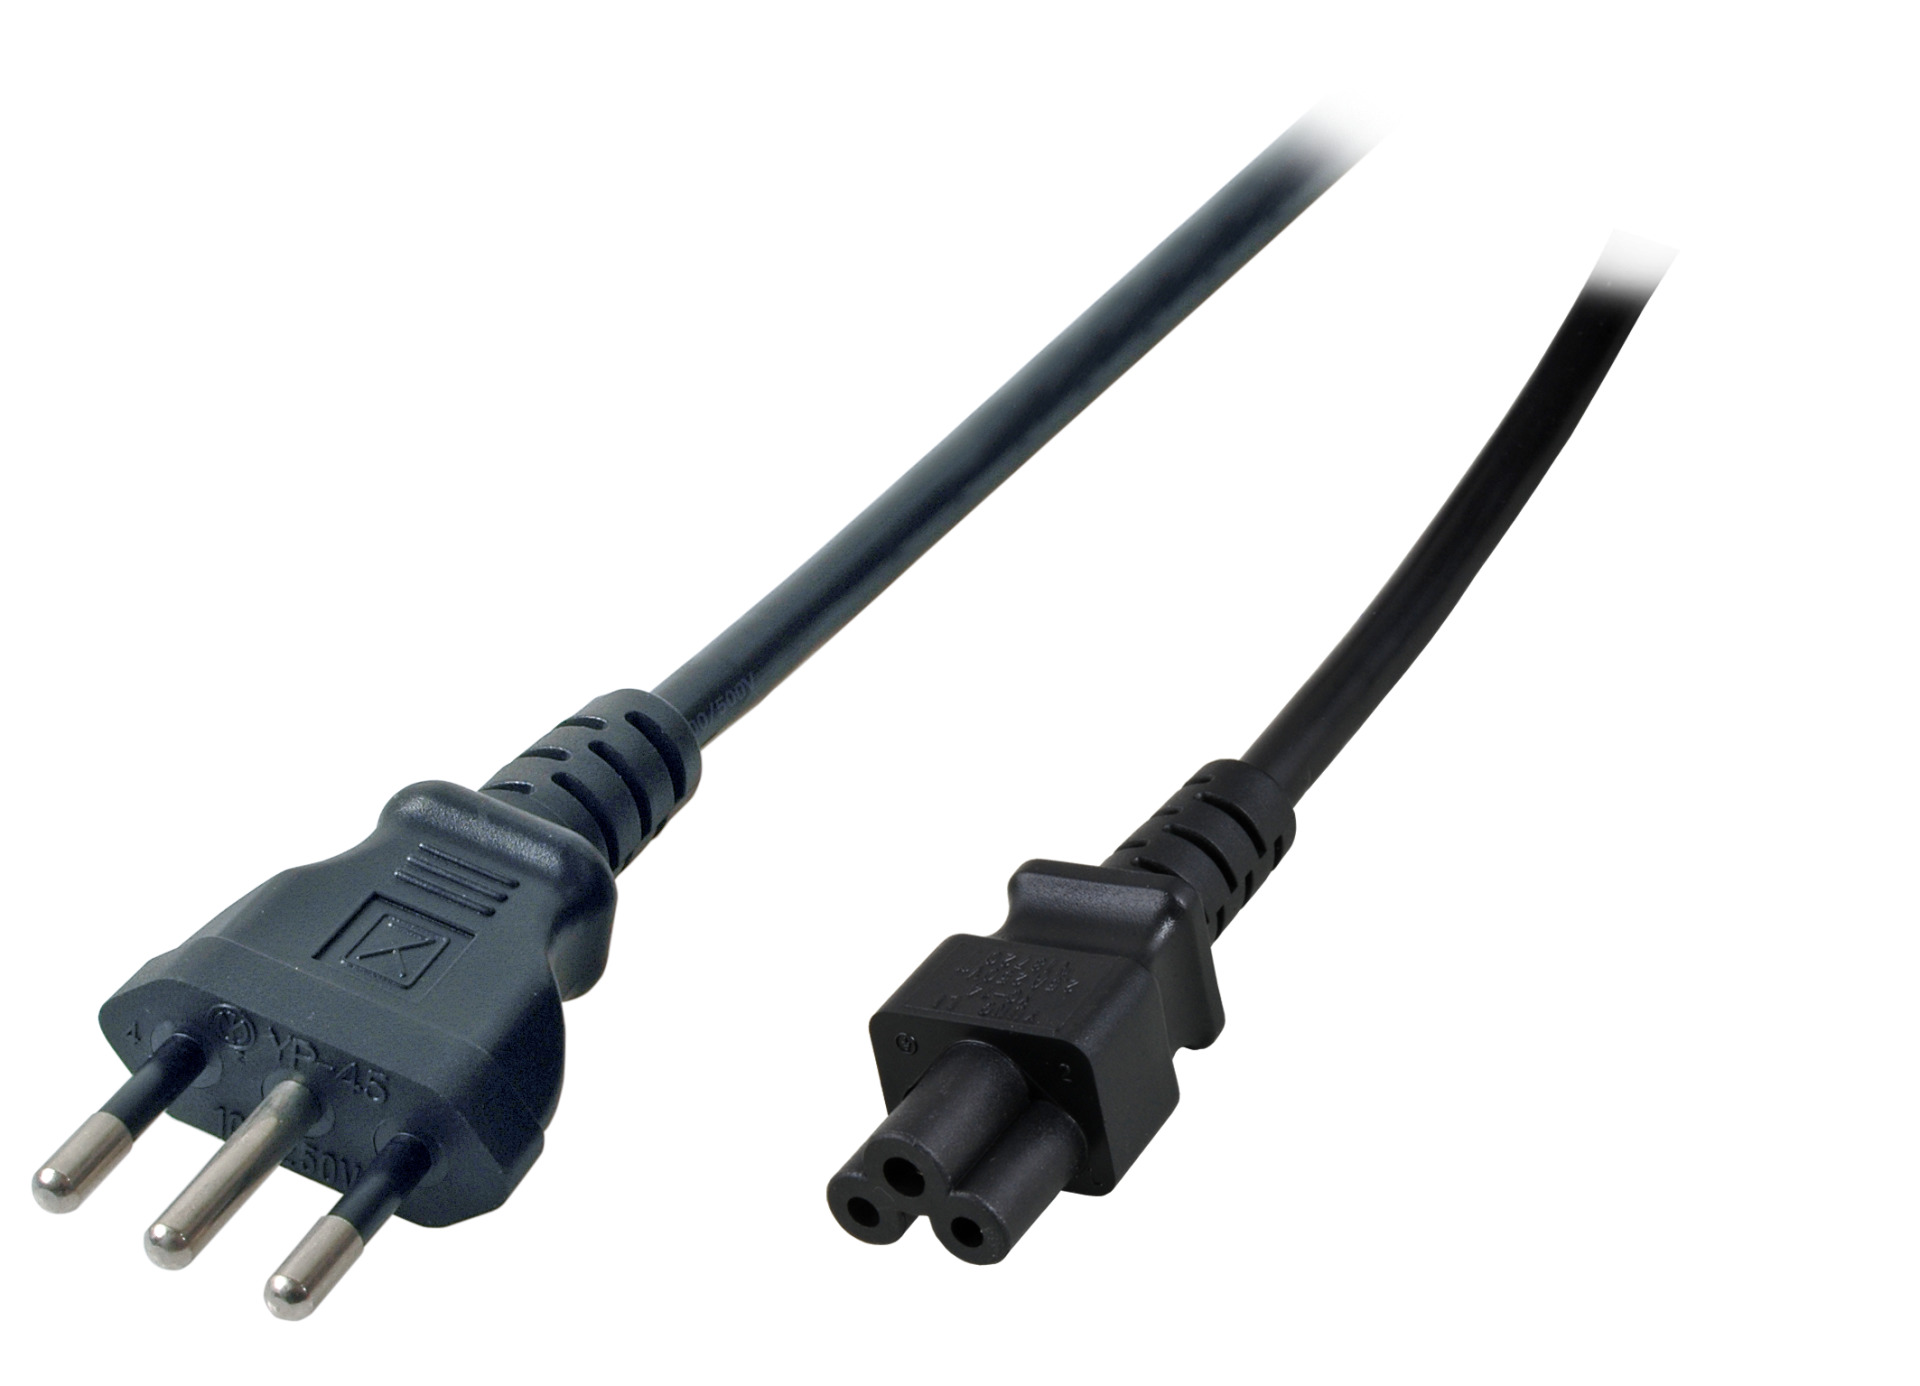 Power Cable Italy Type L - C5 180°, Black, 1.8 m, 3 x 0.75 mm²